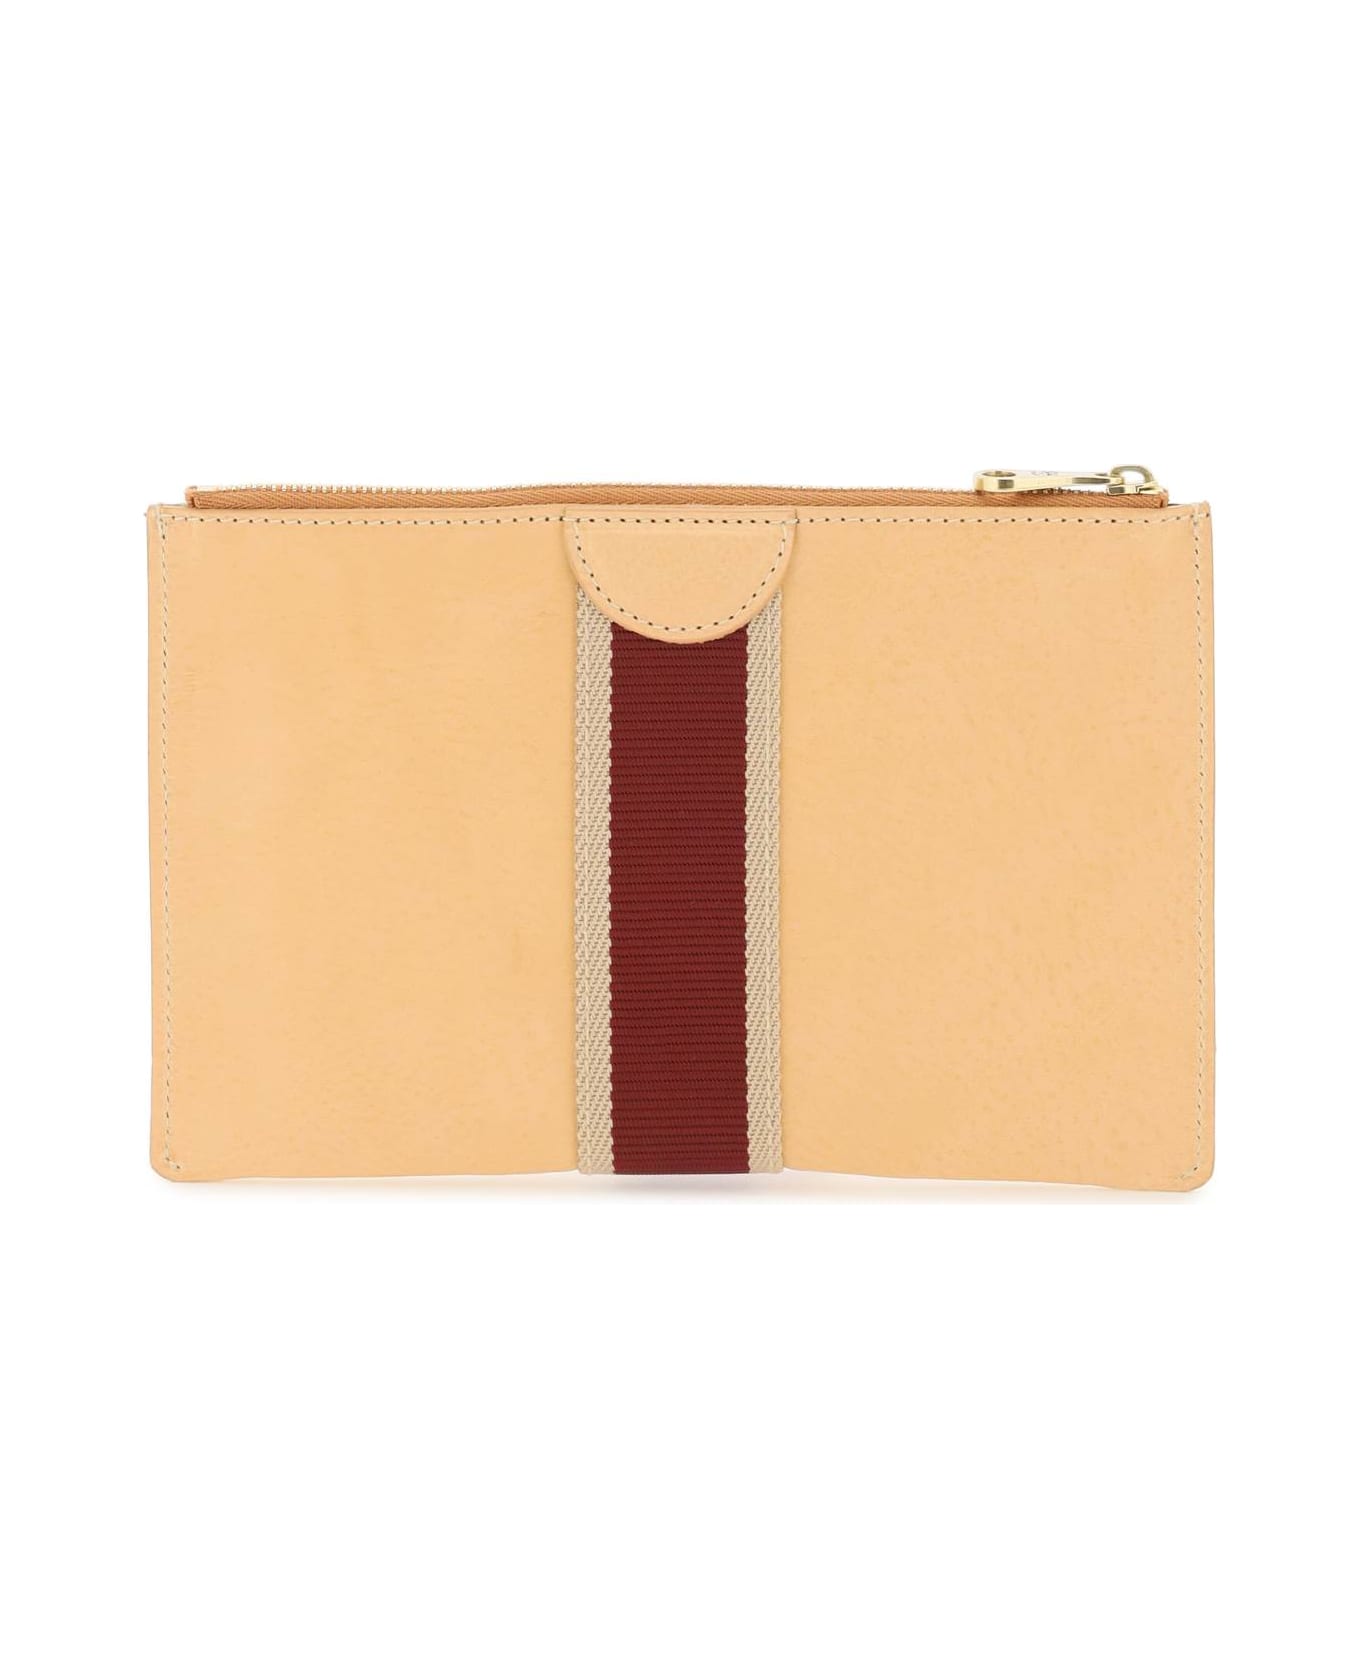 Il Bisonte Leather Pouch With Ribbon - NATURALE (Beige) クラッチバッグ